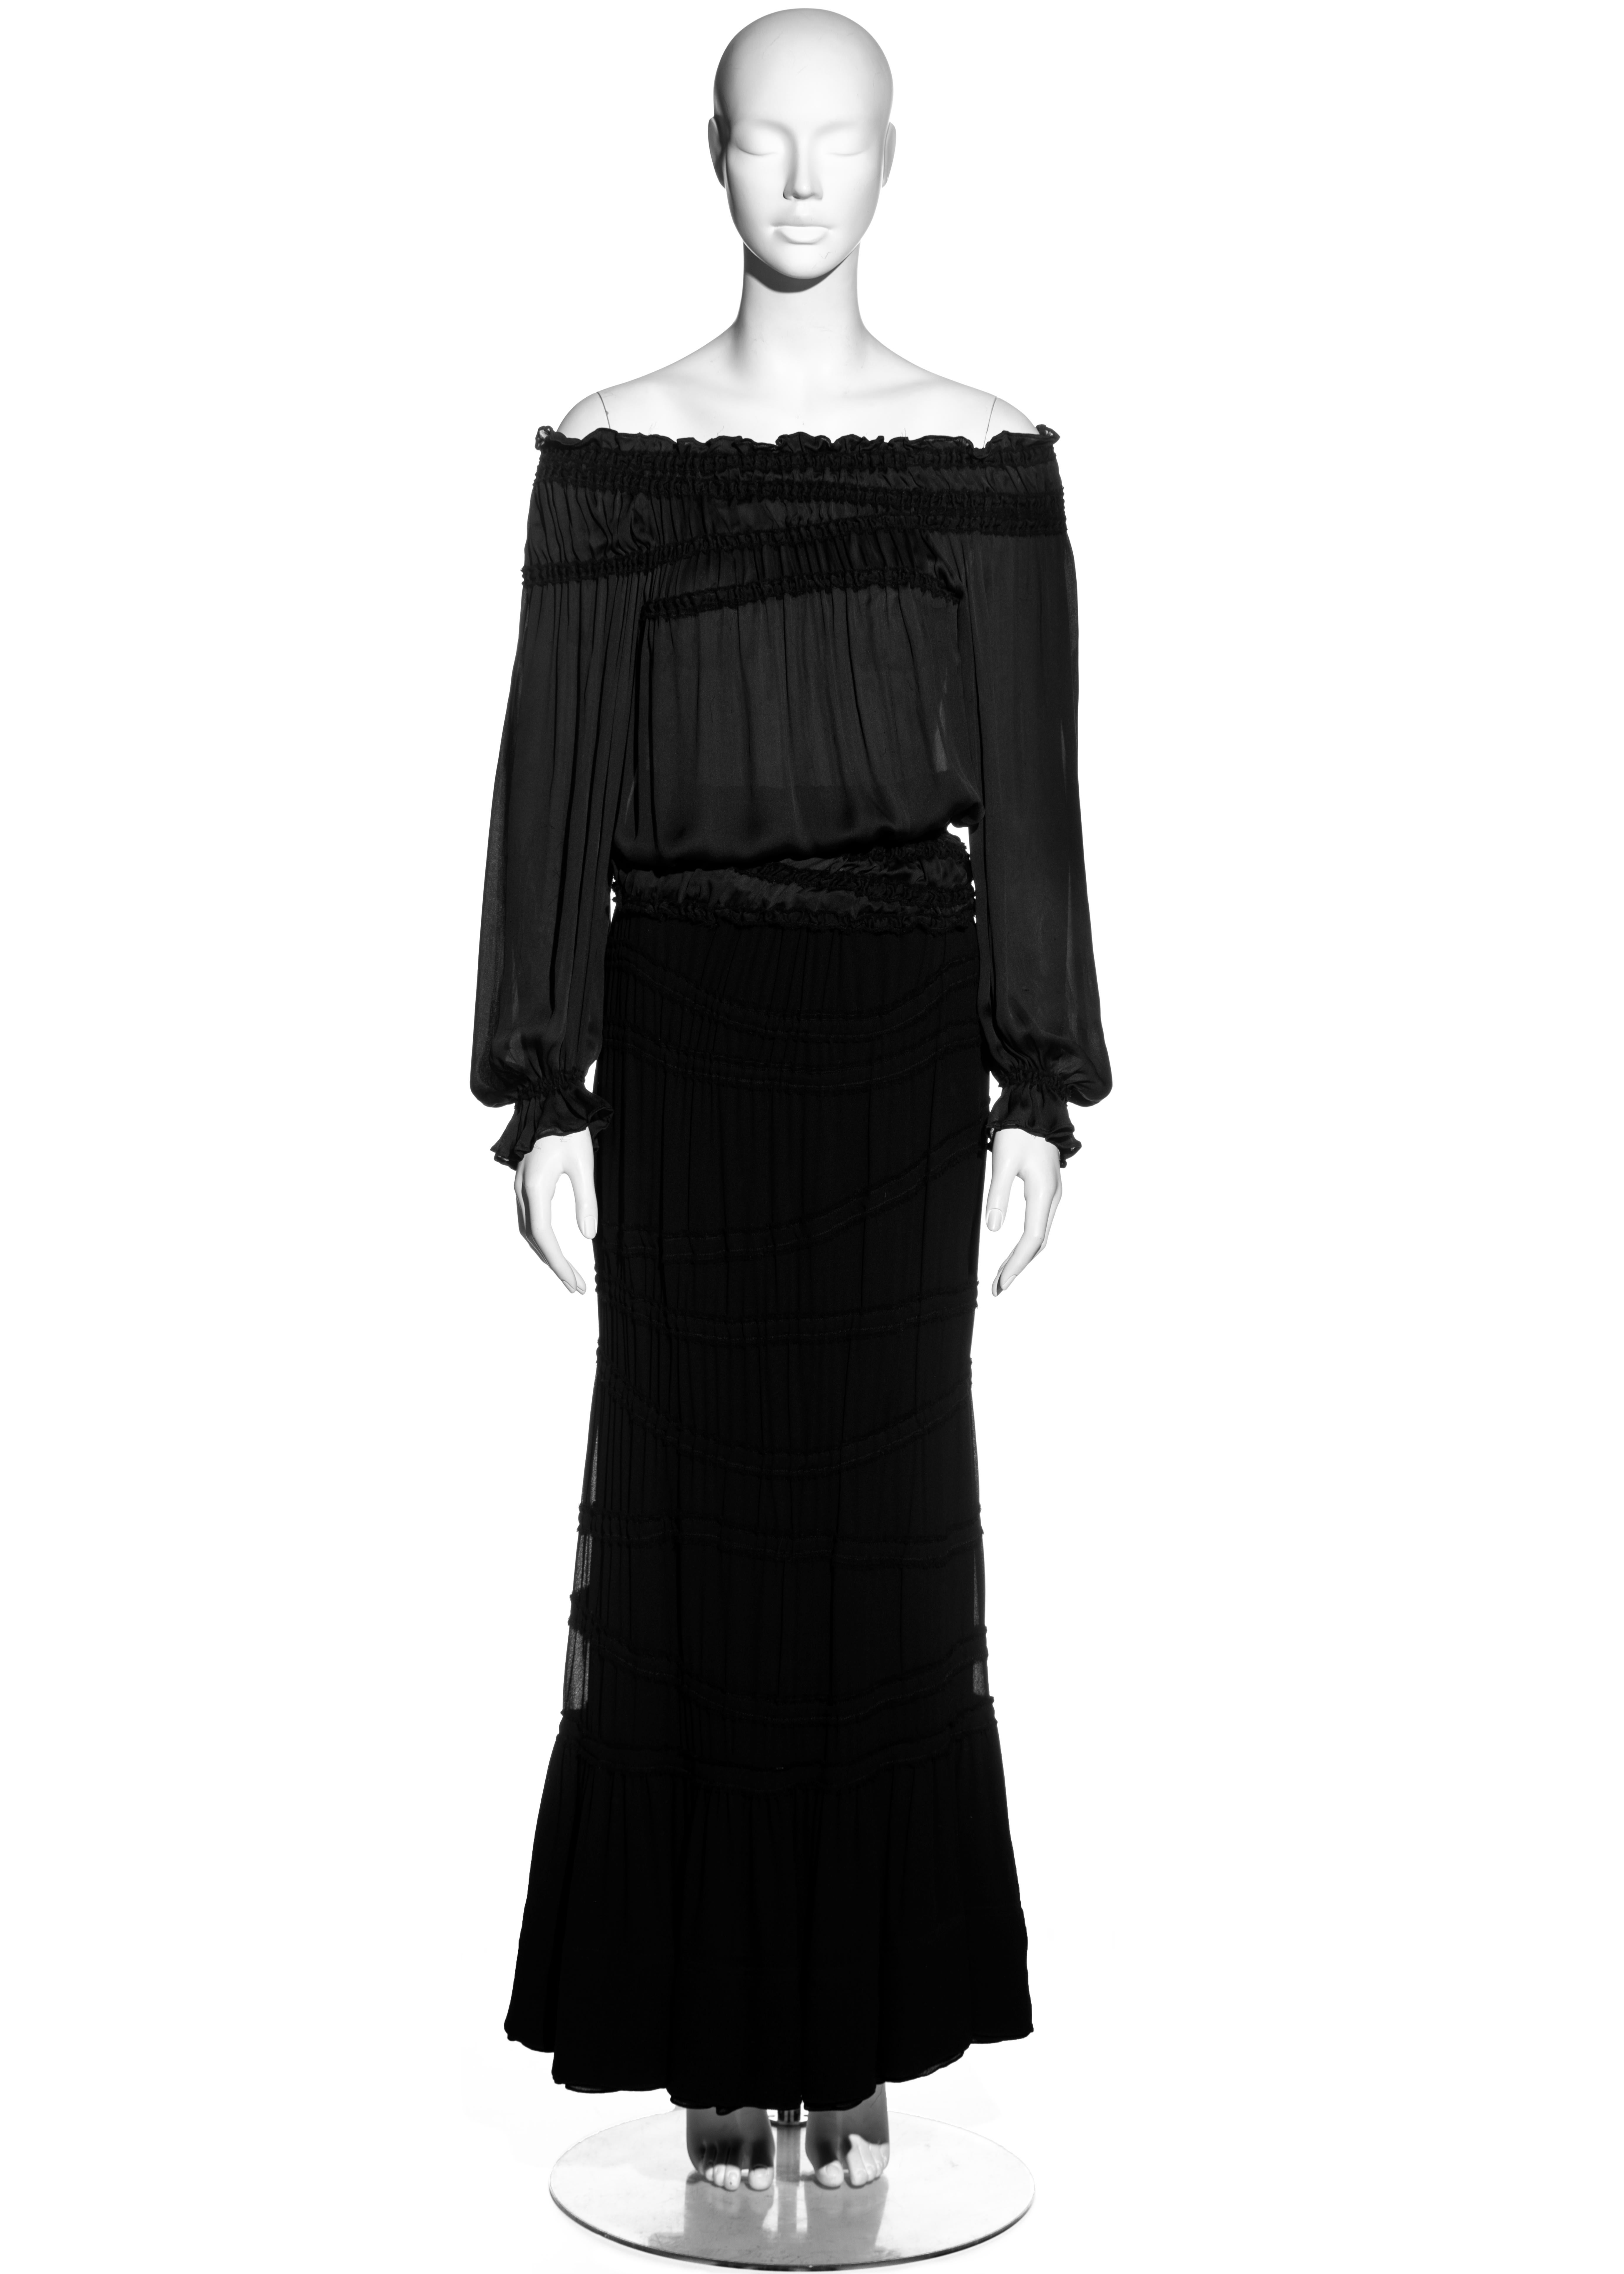 ▪ Yves Saint Laurent black silk poet blouse and maxi skirt set
▪ Designed by Tom Ford
▪ 100% Silk 
▪ Off shoulder poet blouse with elastic shirring 
▪ Shirred maxi crepe skirt with pleated layered hem 
▪ IT 38 - FR 34 - UK 6 - US 4
▪ Fall-Winter 2001